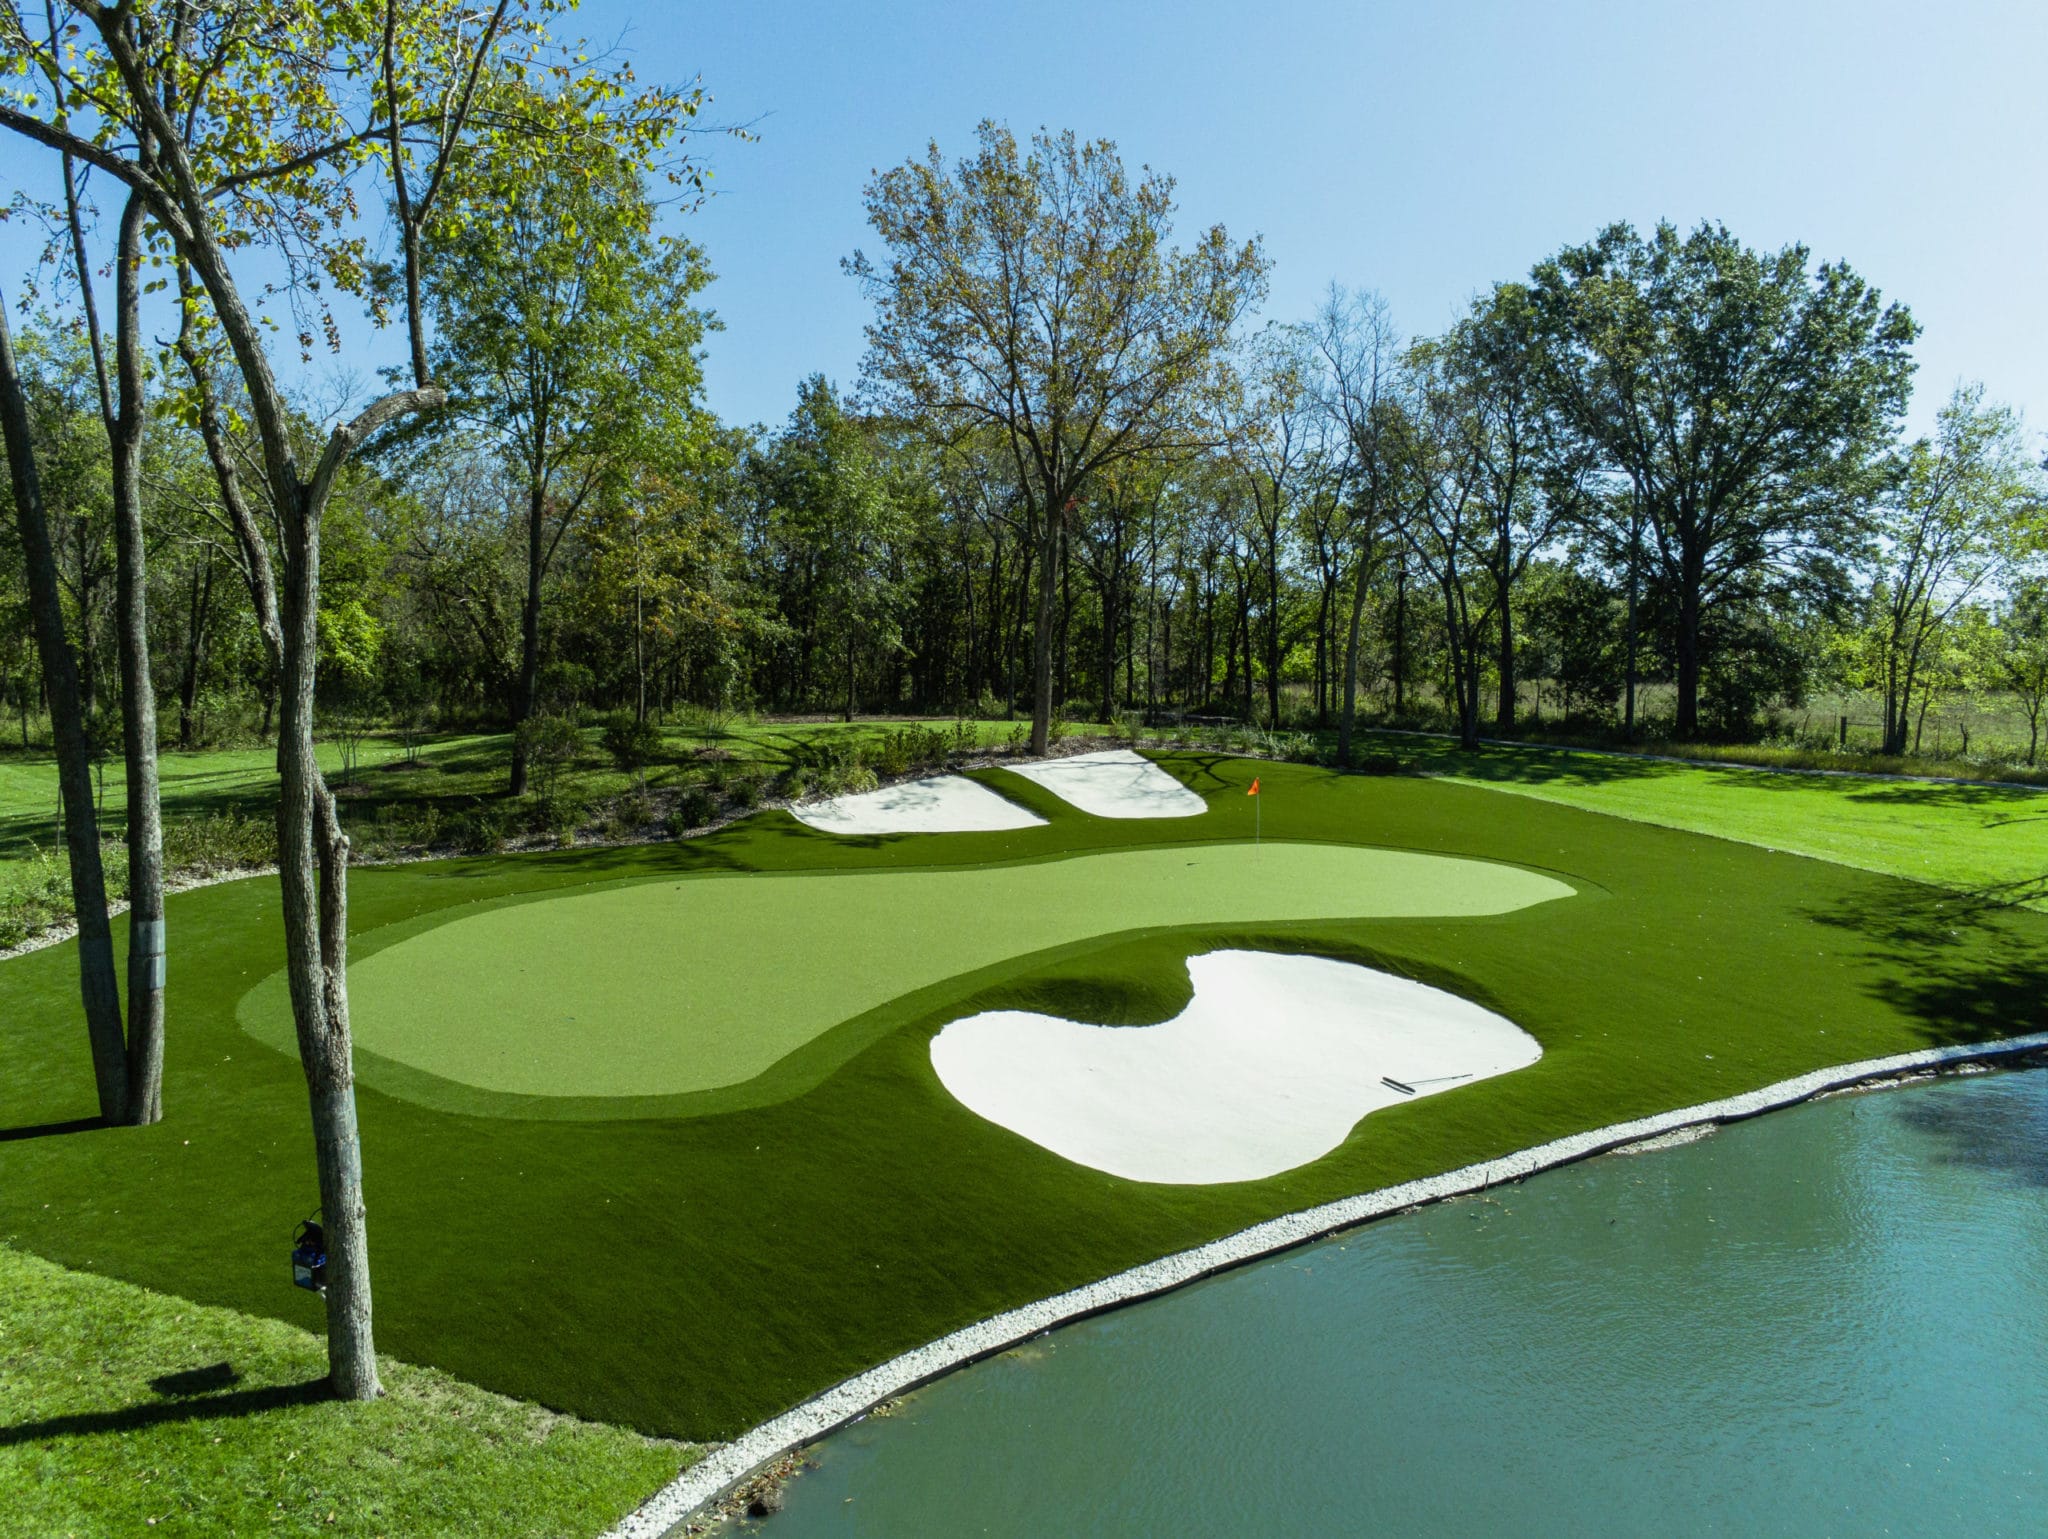 Fishtech Installs Famous 12th Hole at Augusta Replica for Employees